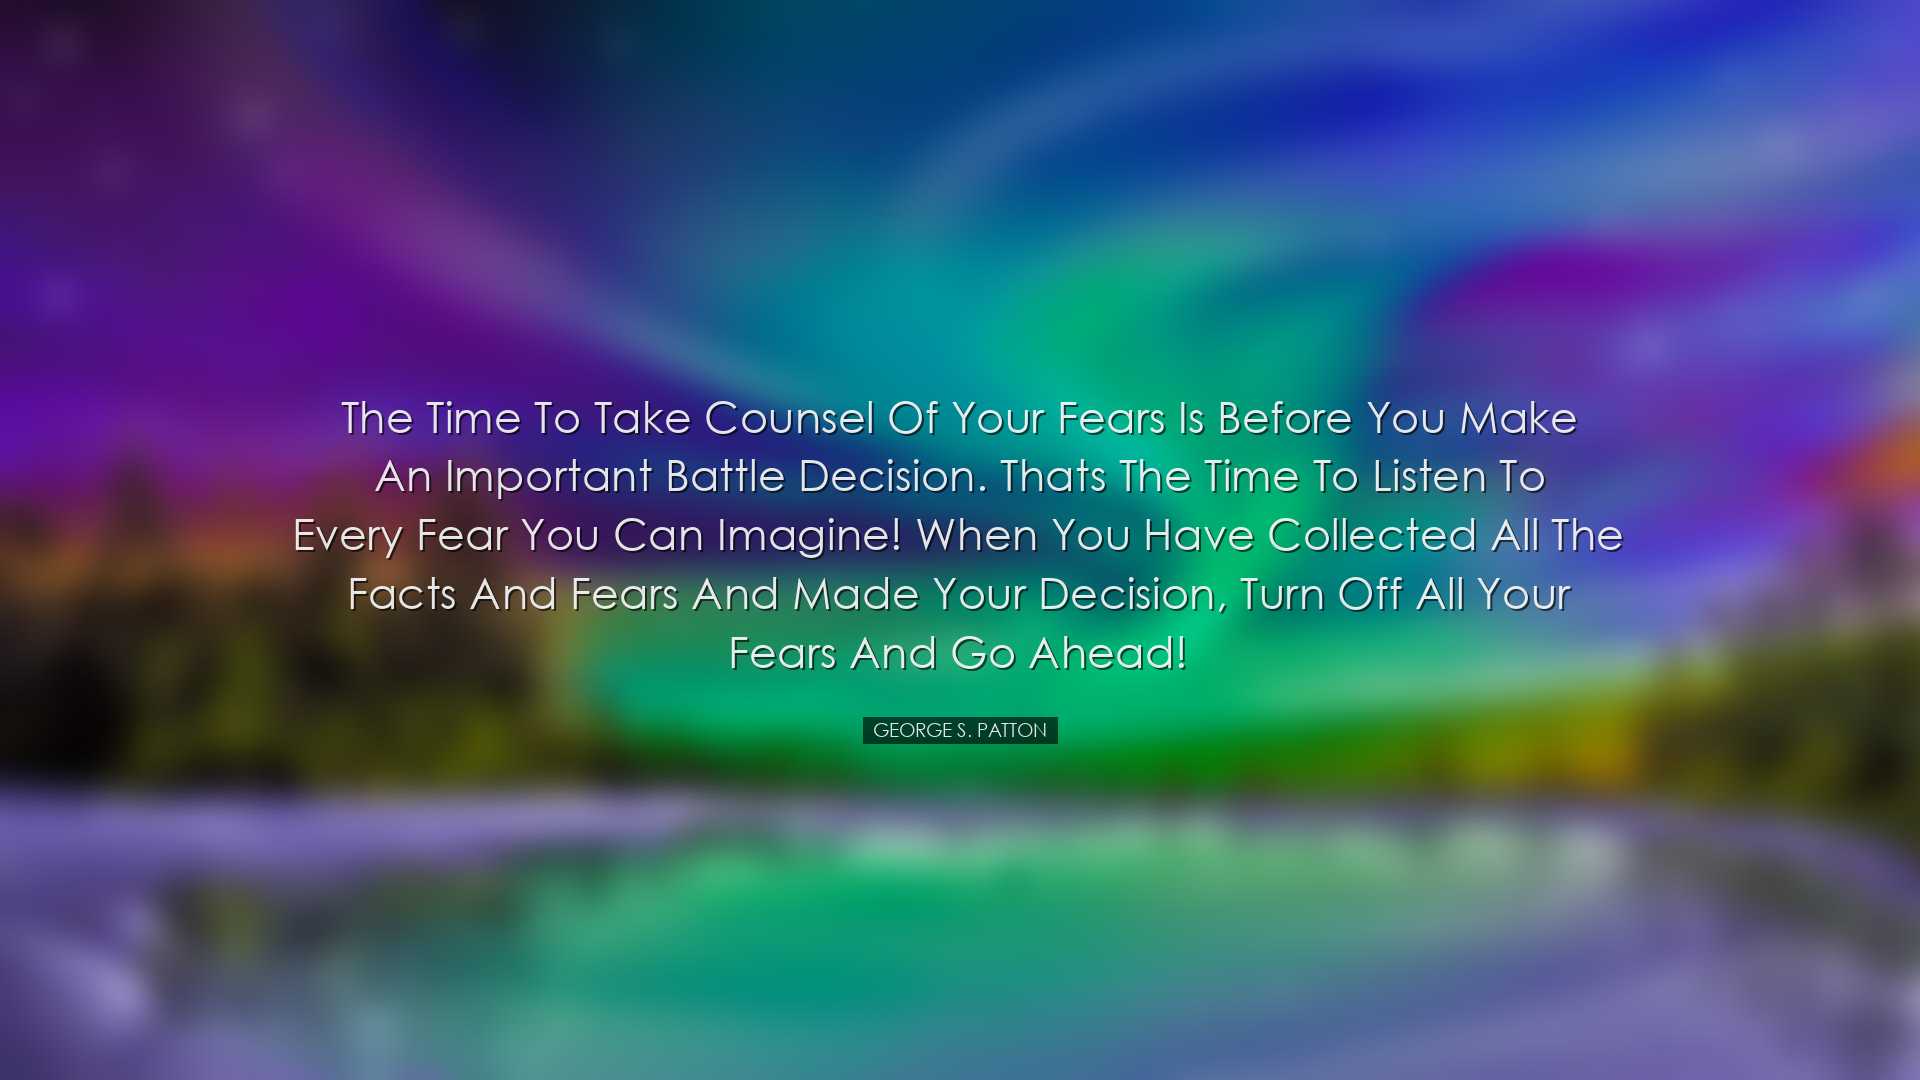 The time to take counsel of your fears is before you make an impor